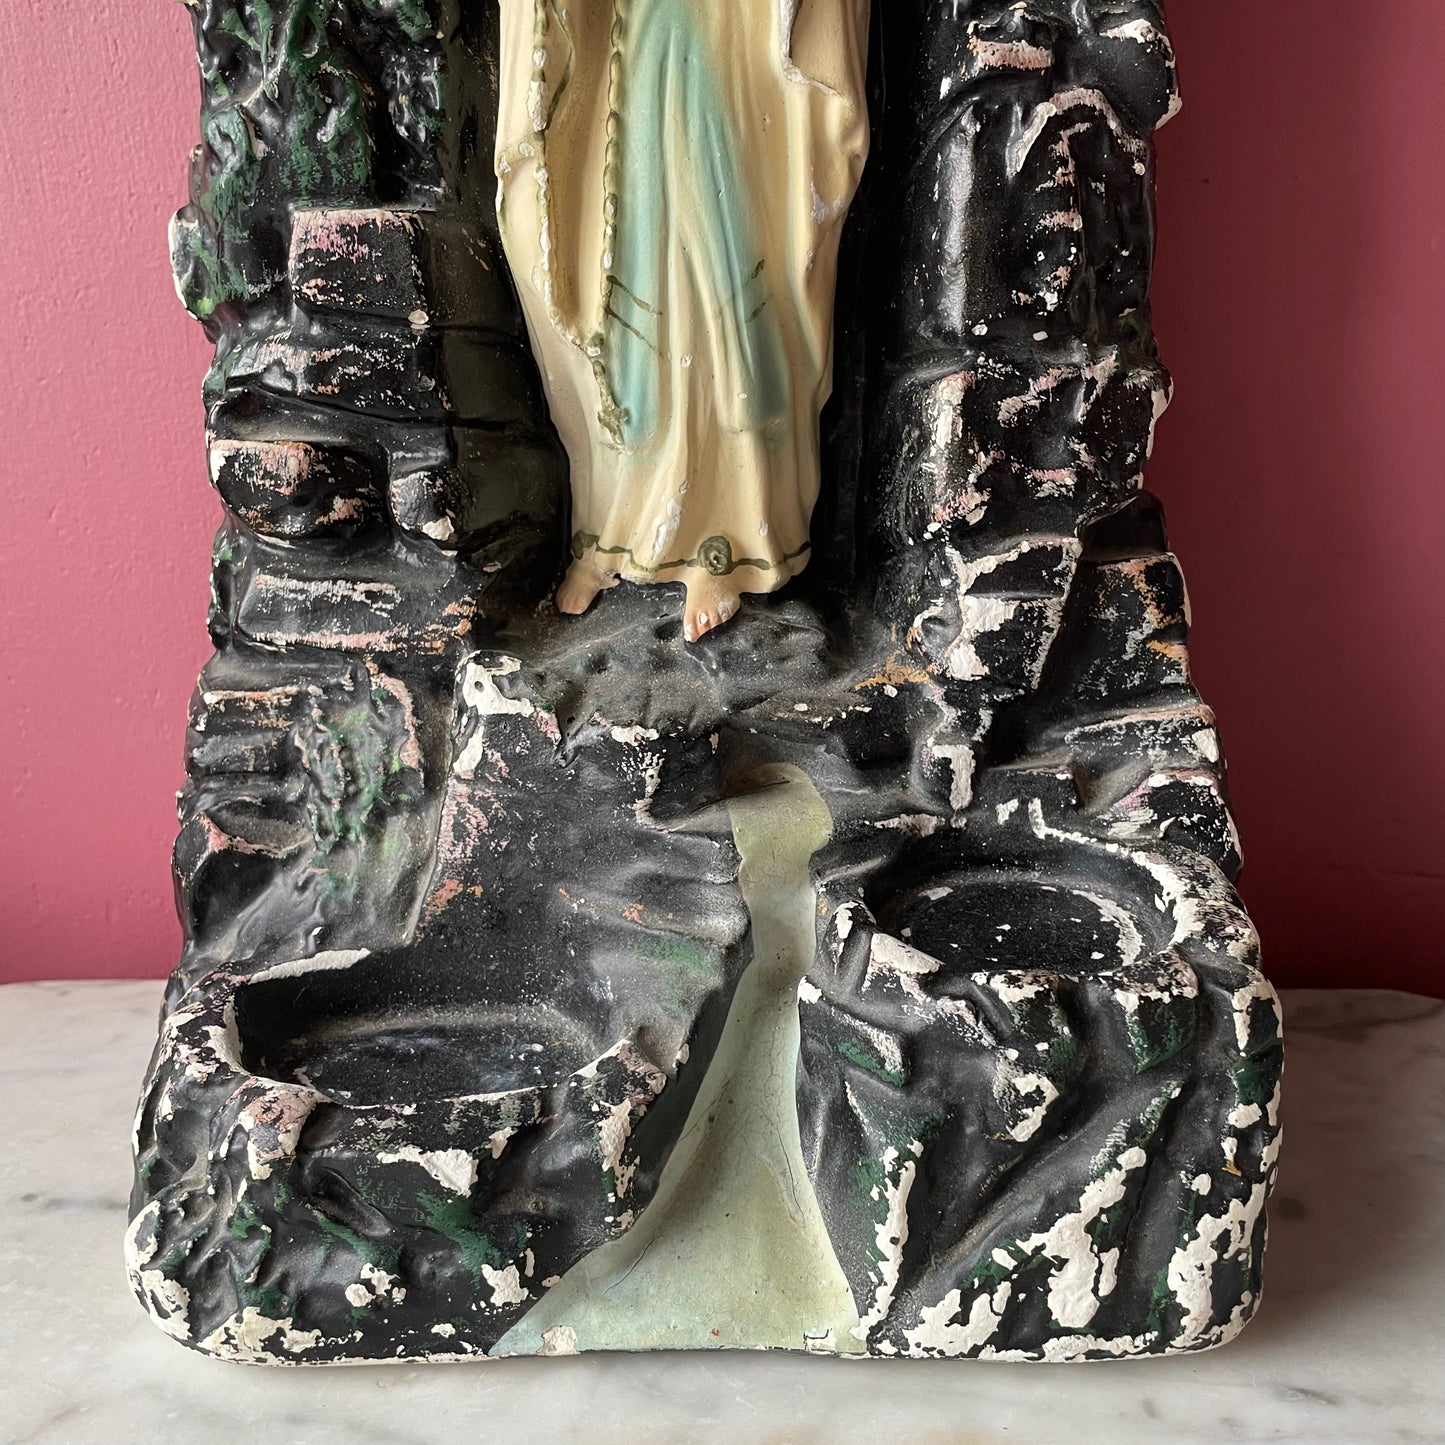 Vintage Chalkware Grotto with Madonna